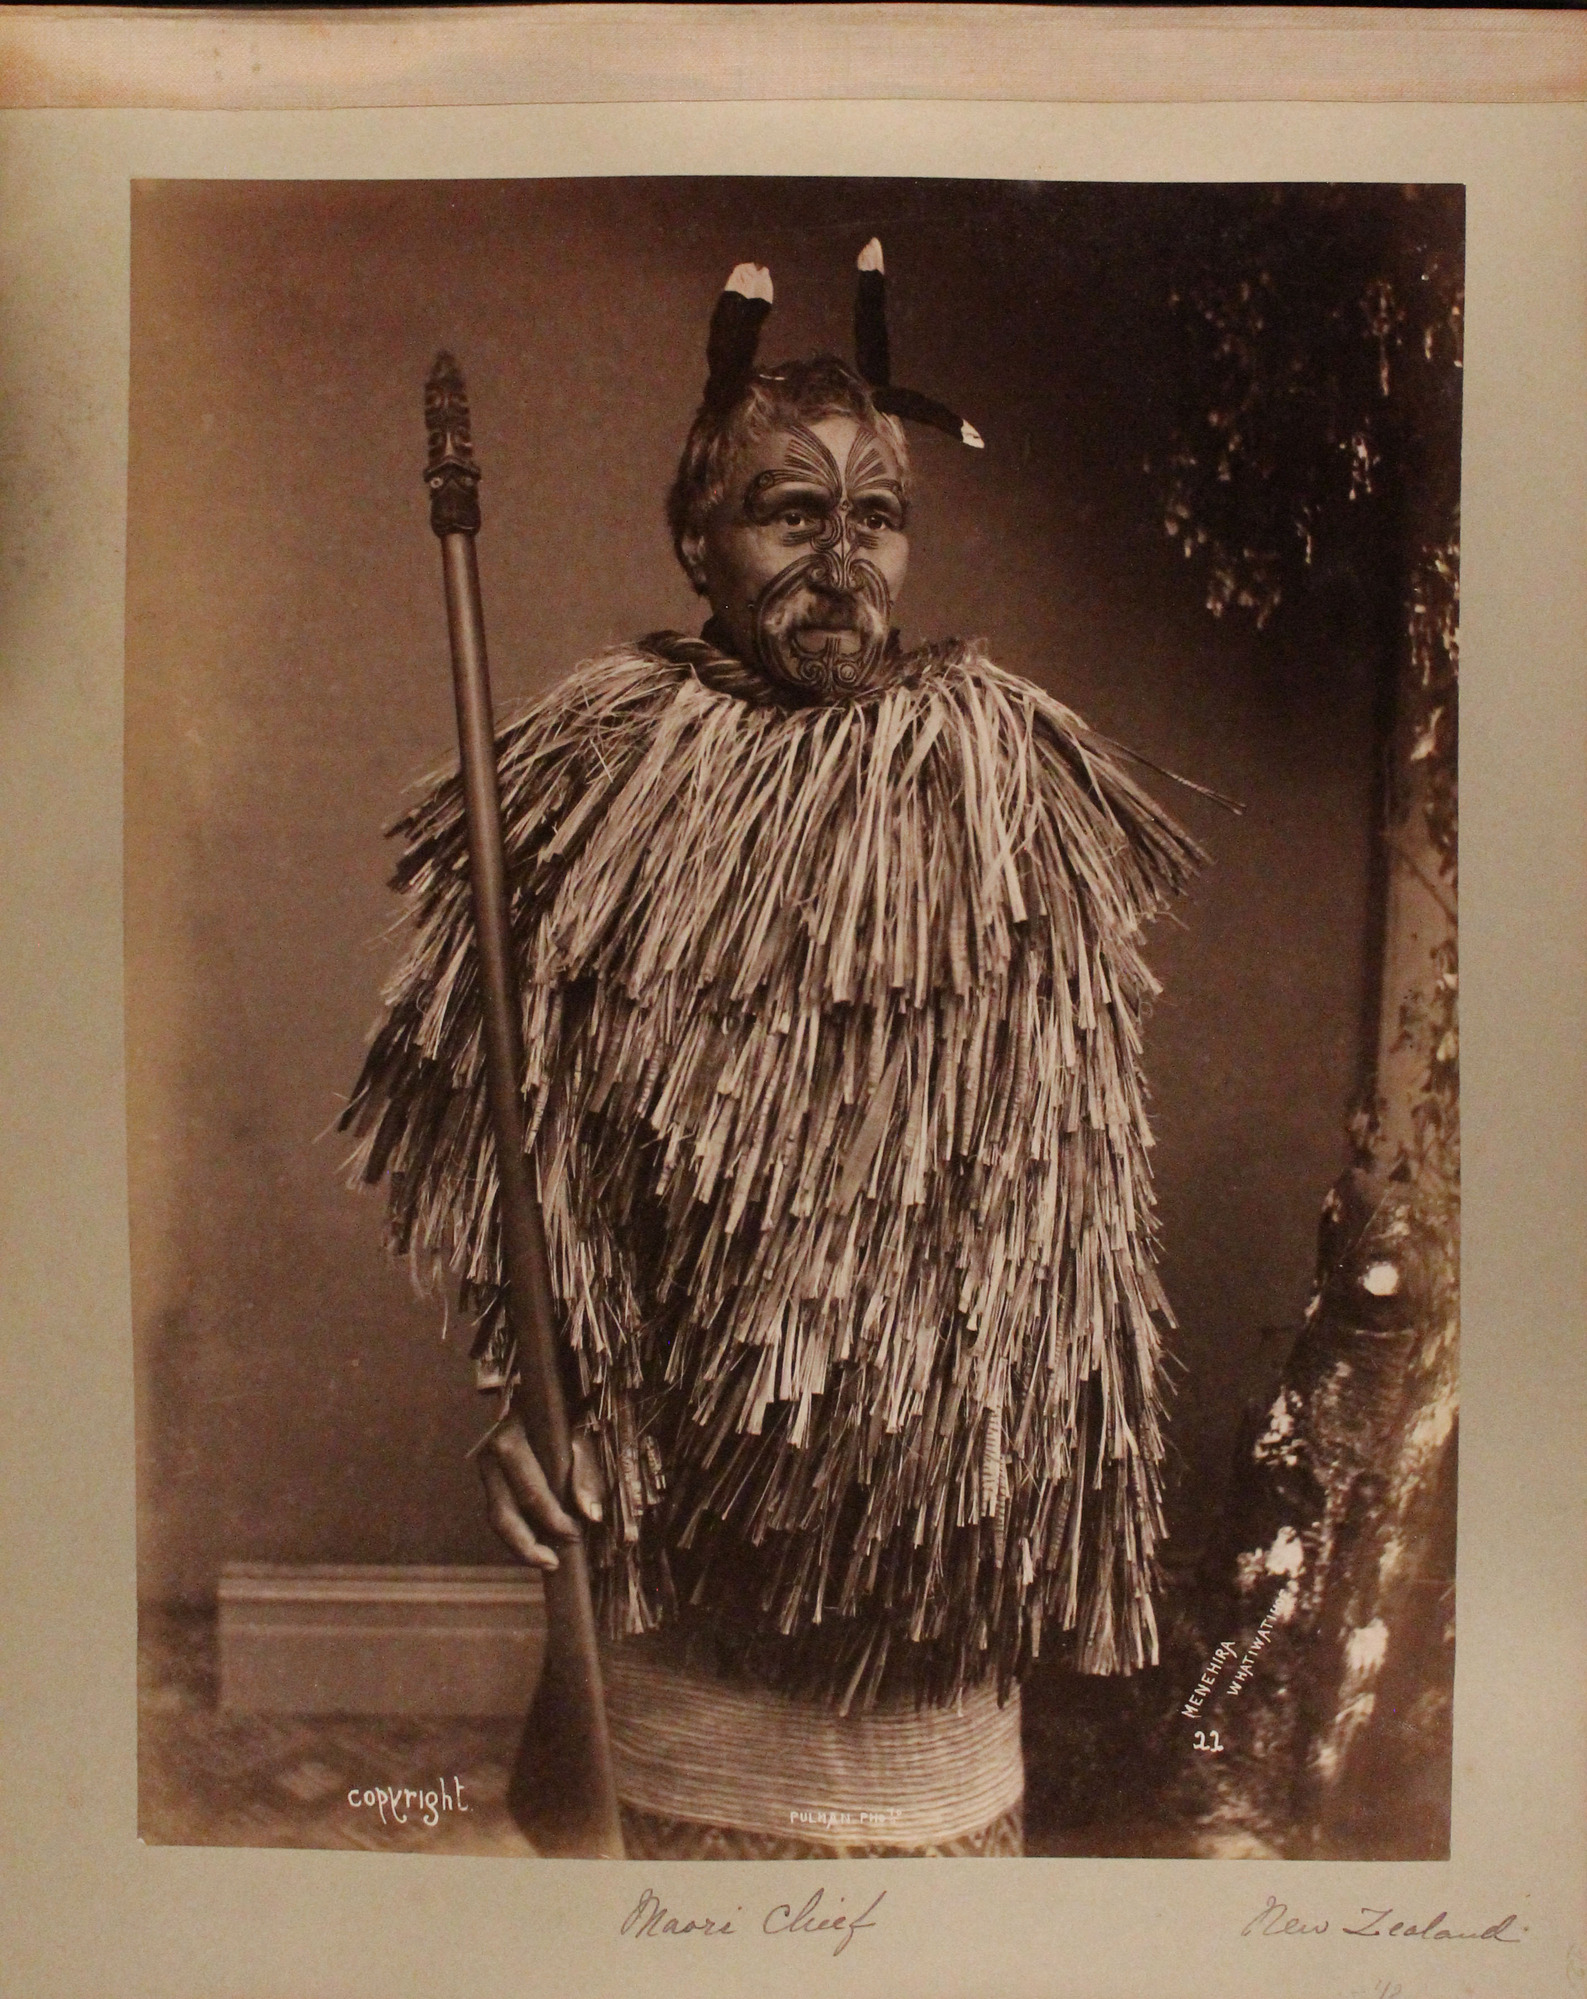 Maori chief, Menehira, poses he has a mustache, short, graying hair with feather decorations and extensive facial tattoos. He wears a cloak made of layers of flax fringe around his upper body and holds a wooden staff with a carving on top.